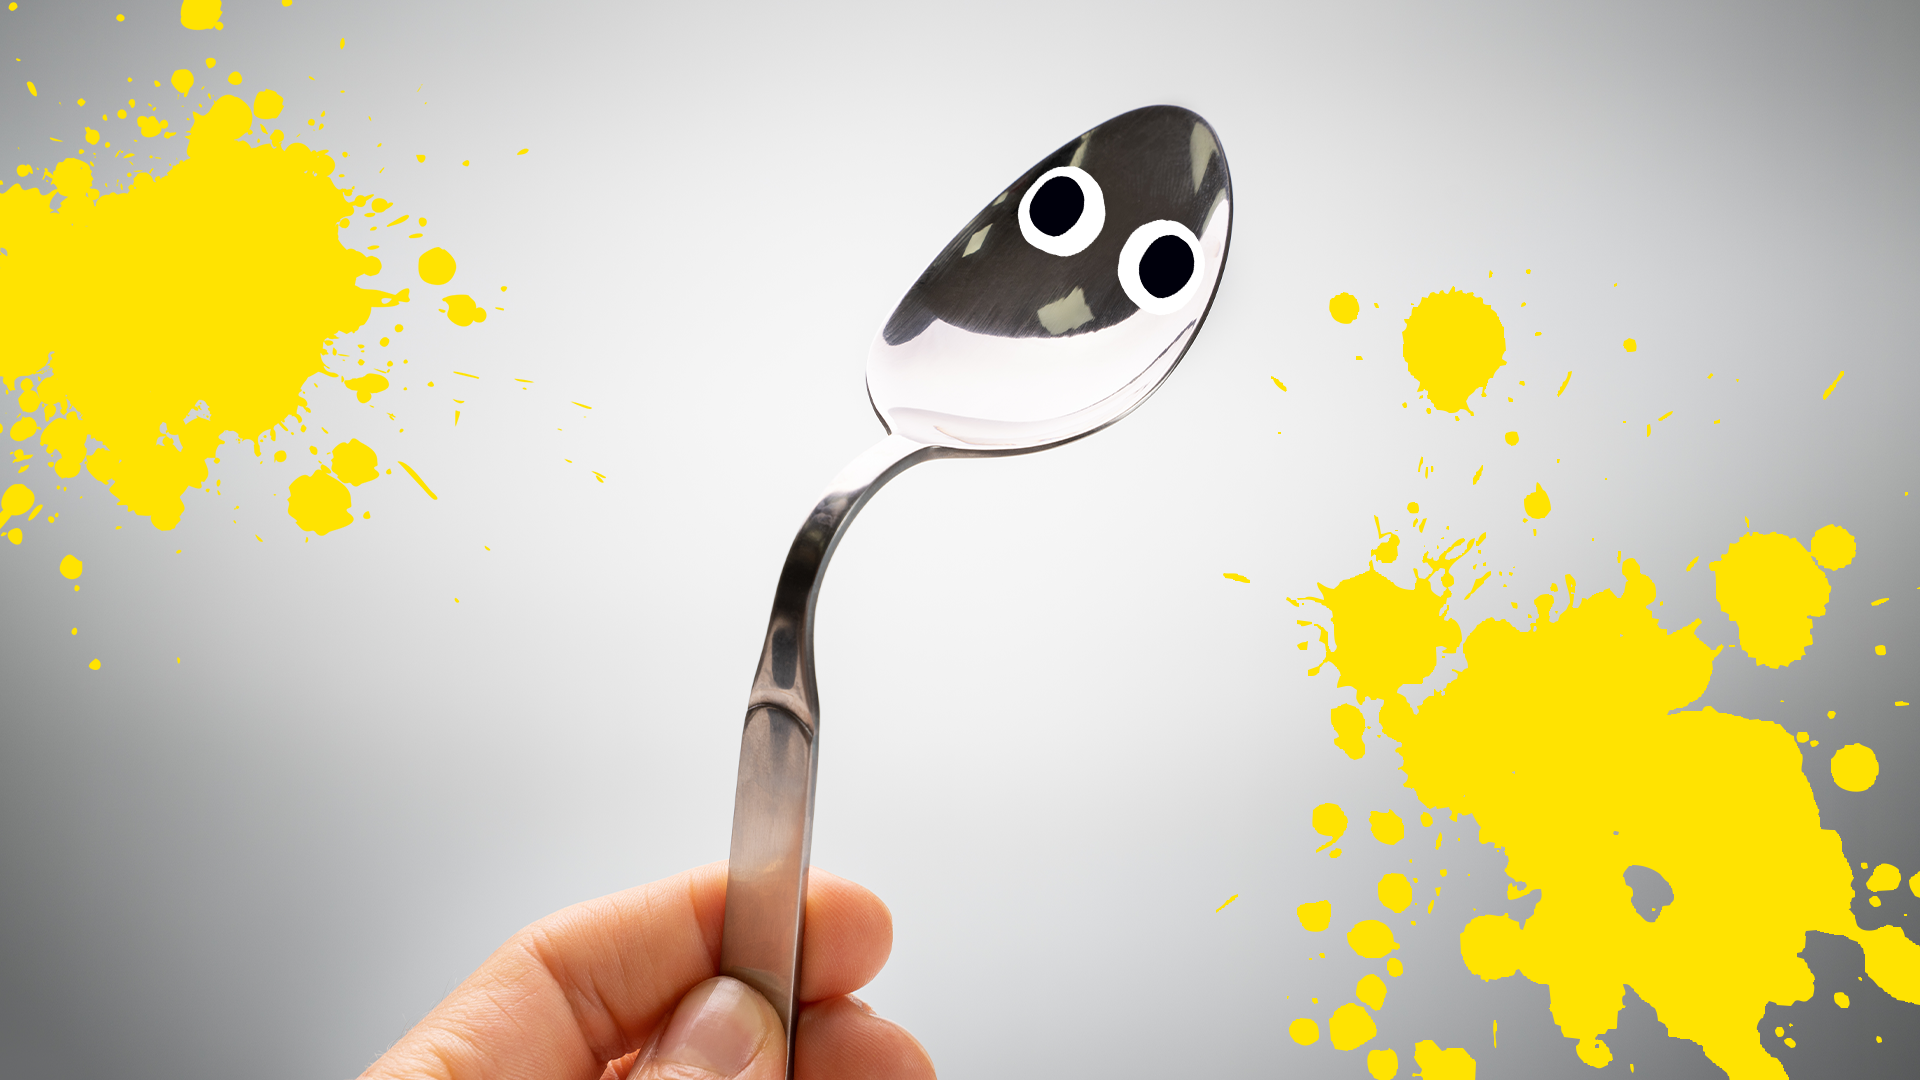 Bent spoon with eyes and splats